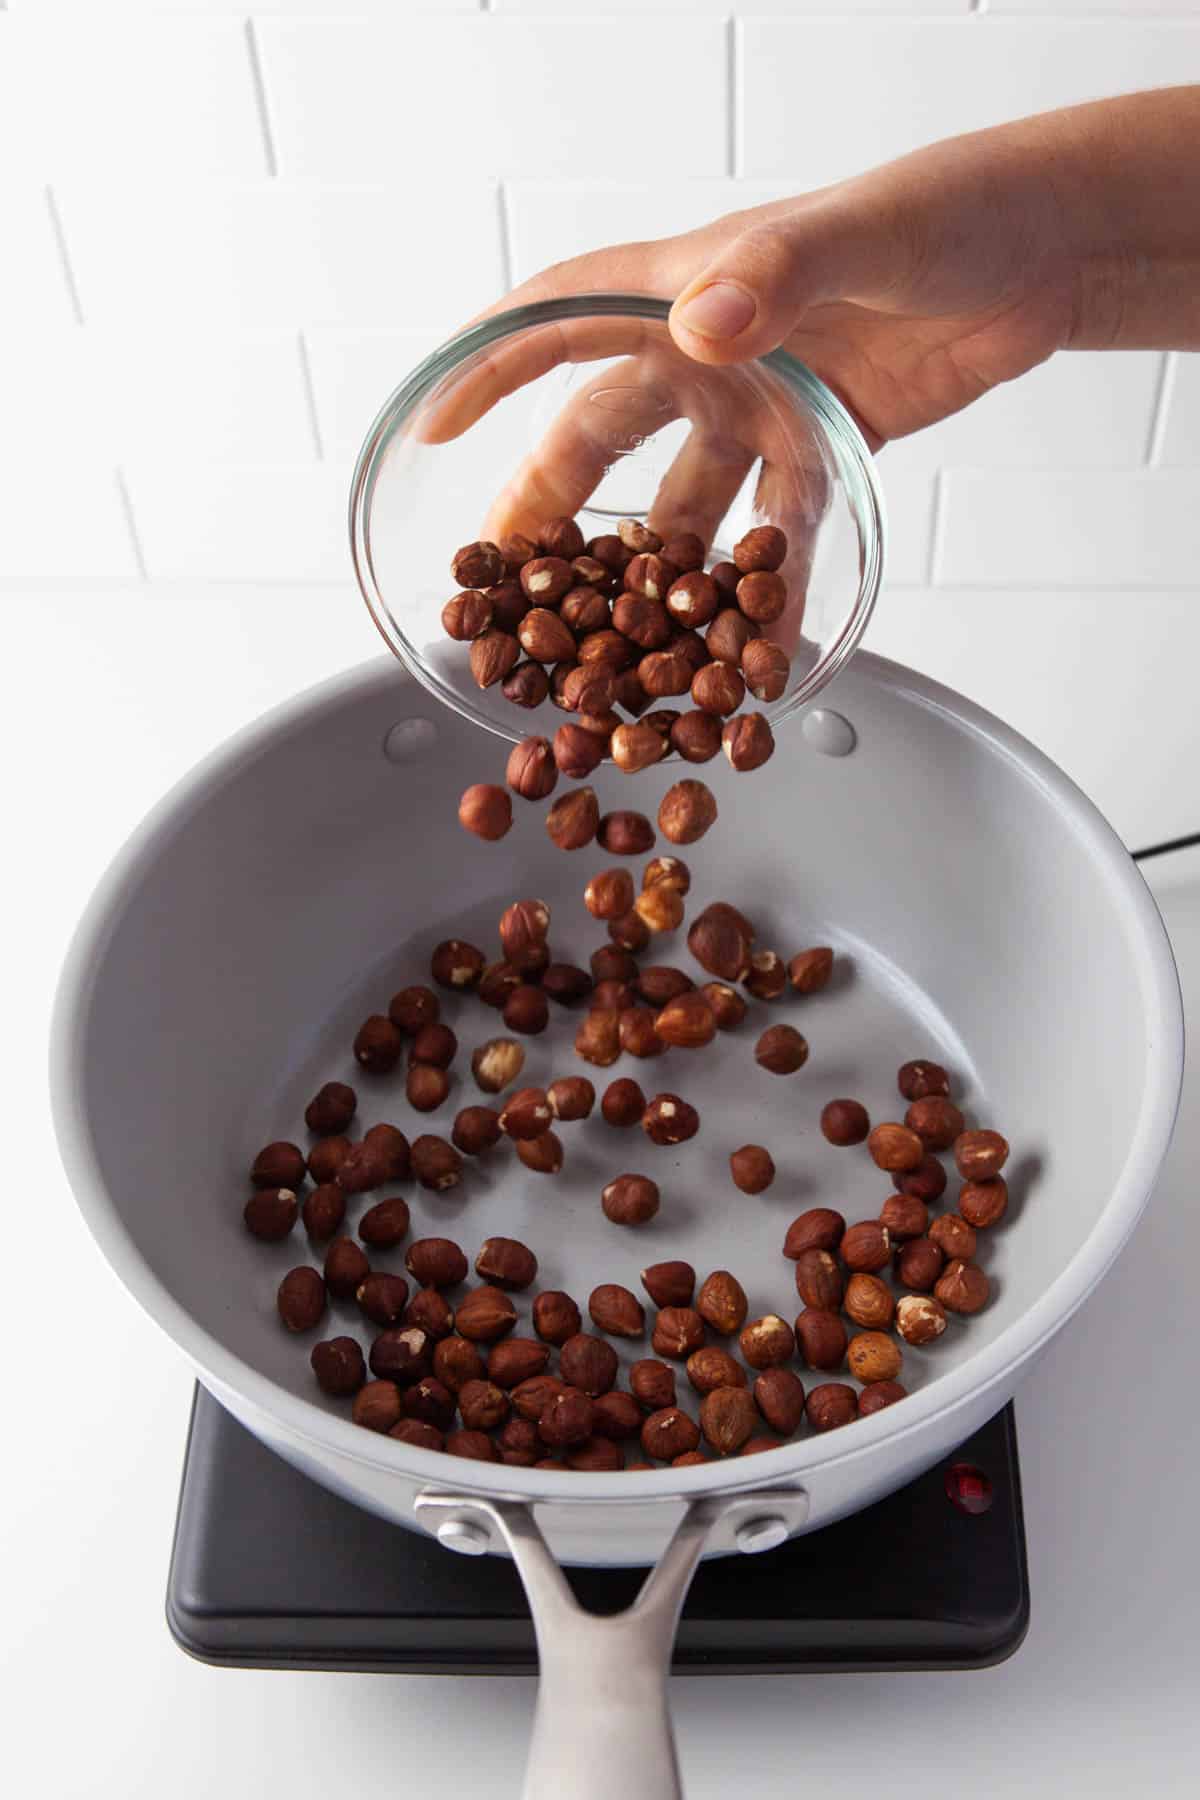 A hand pouring hazelnuts into a skillet from a glass bowl.